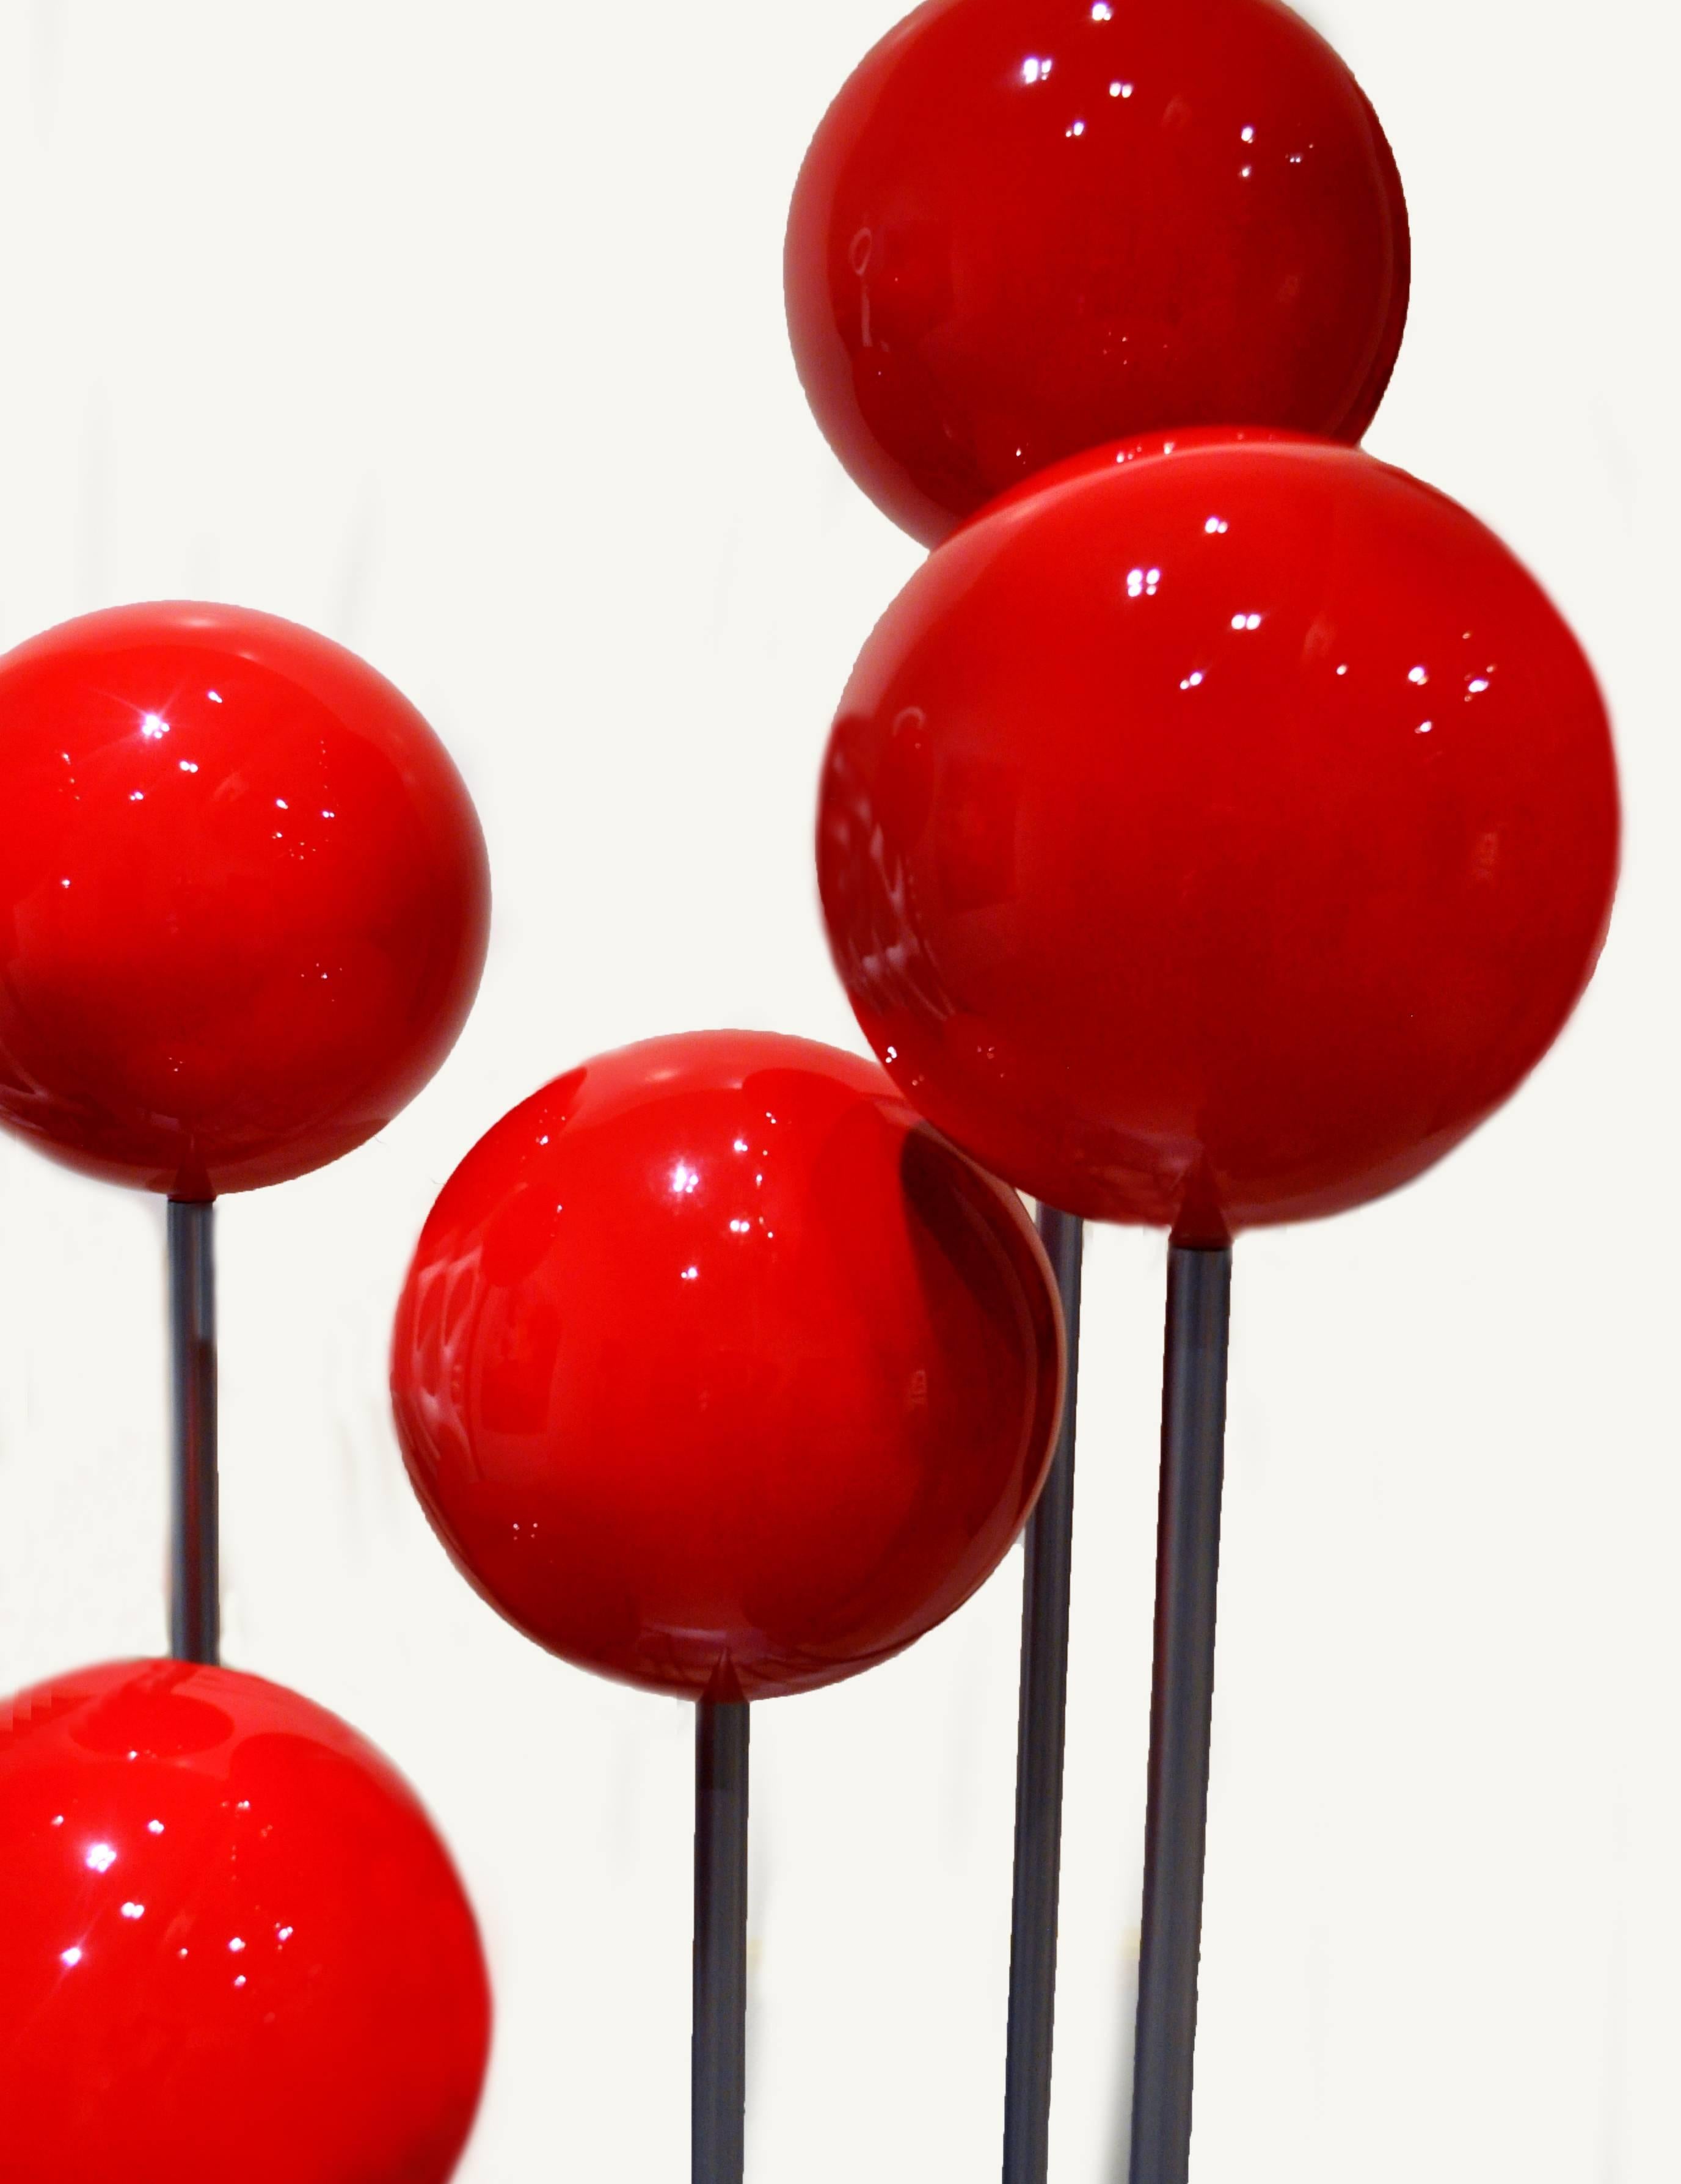 In his earlier career, artist Robert Marion (born 1939) was an award winning auto designer before turning full time to creating what he calls Minimalist architectural sculptures. This modern and whimsical sculpture titled Balls of Fire III, is